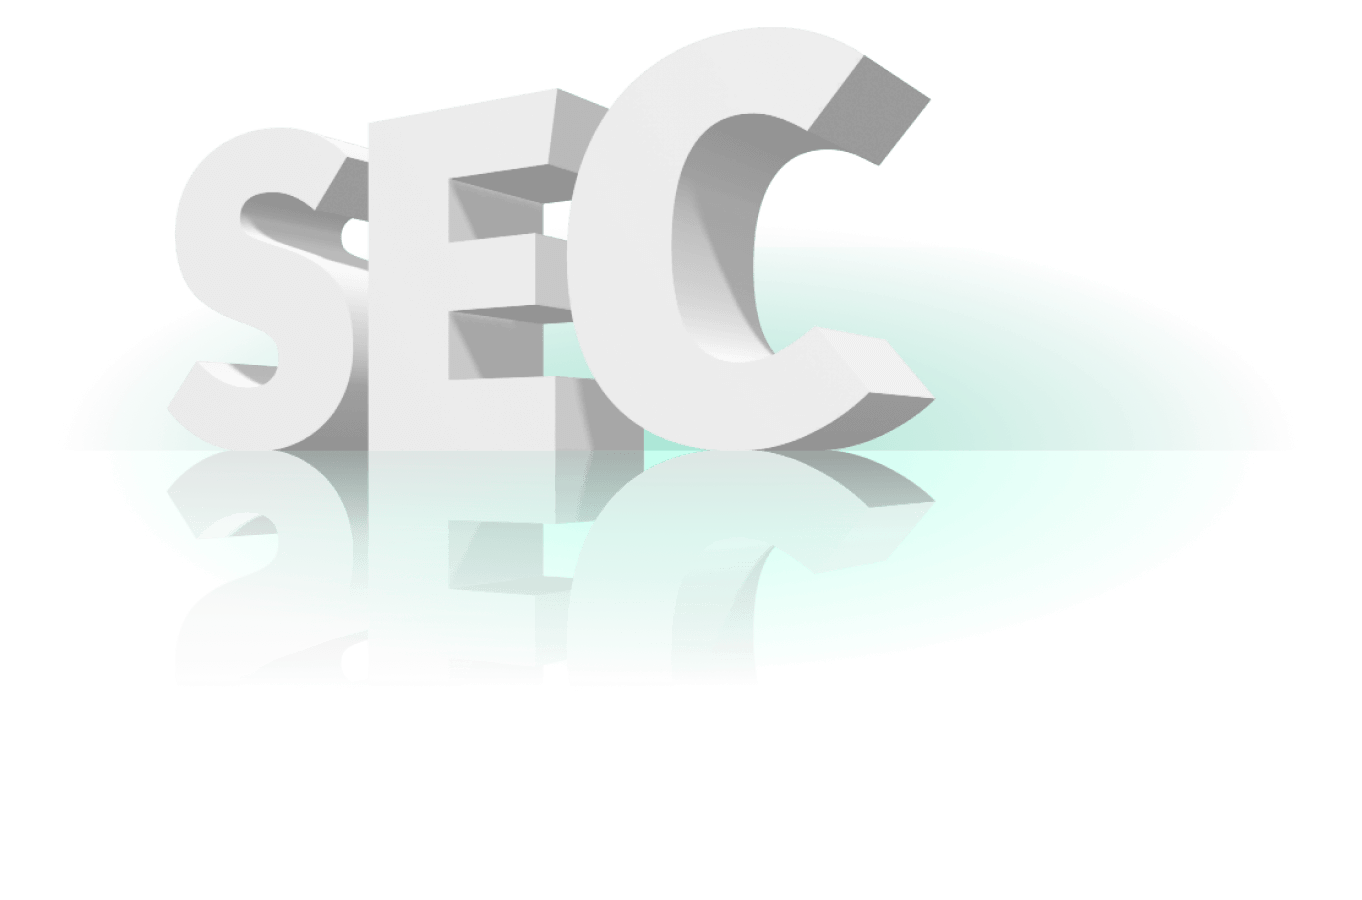 SEC in the 3D letters UI Element